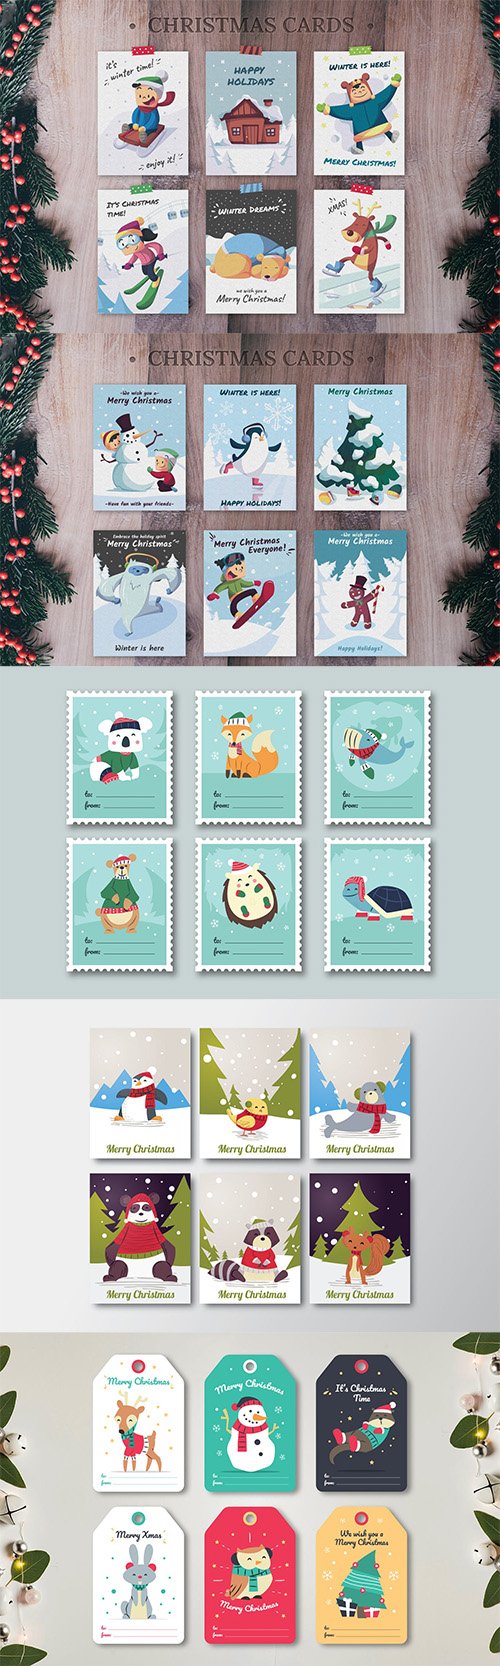 Hand Drawn Christmas Cards Collection